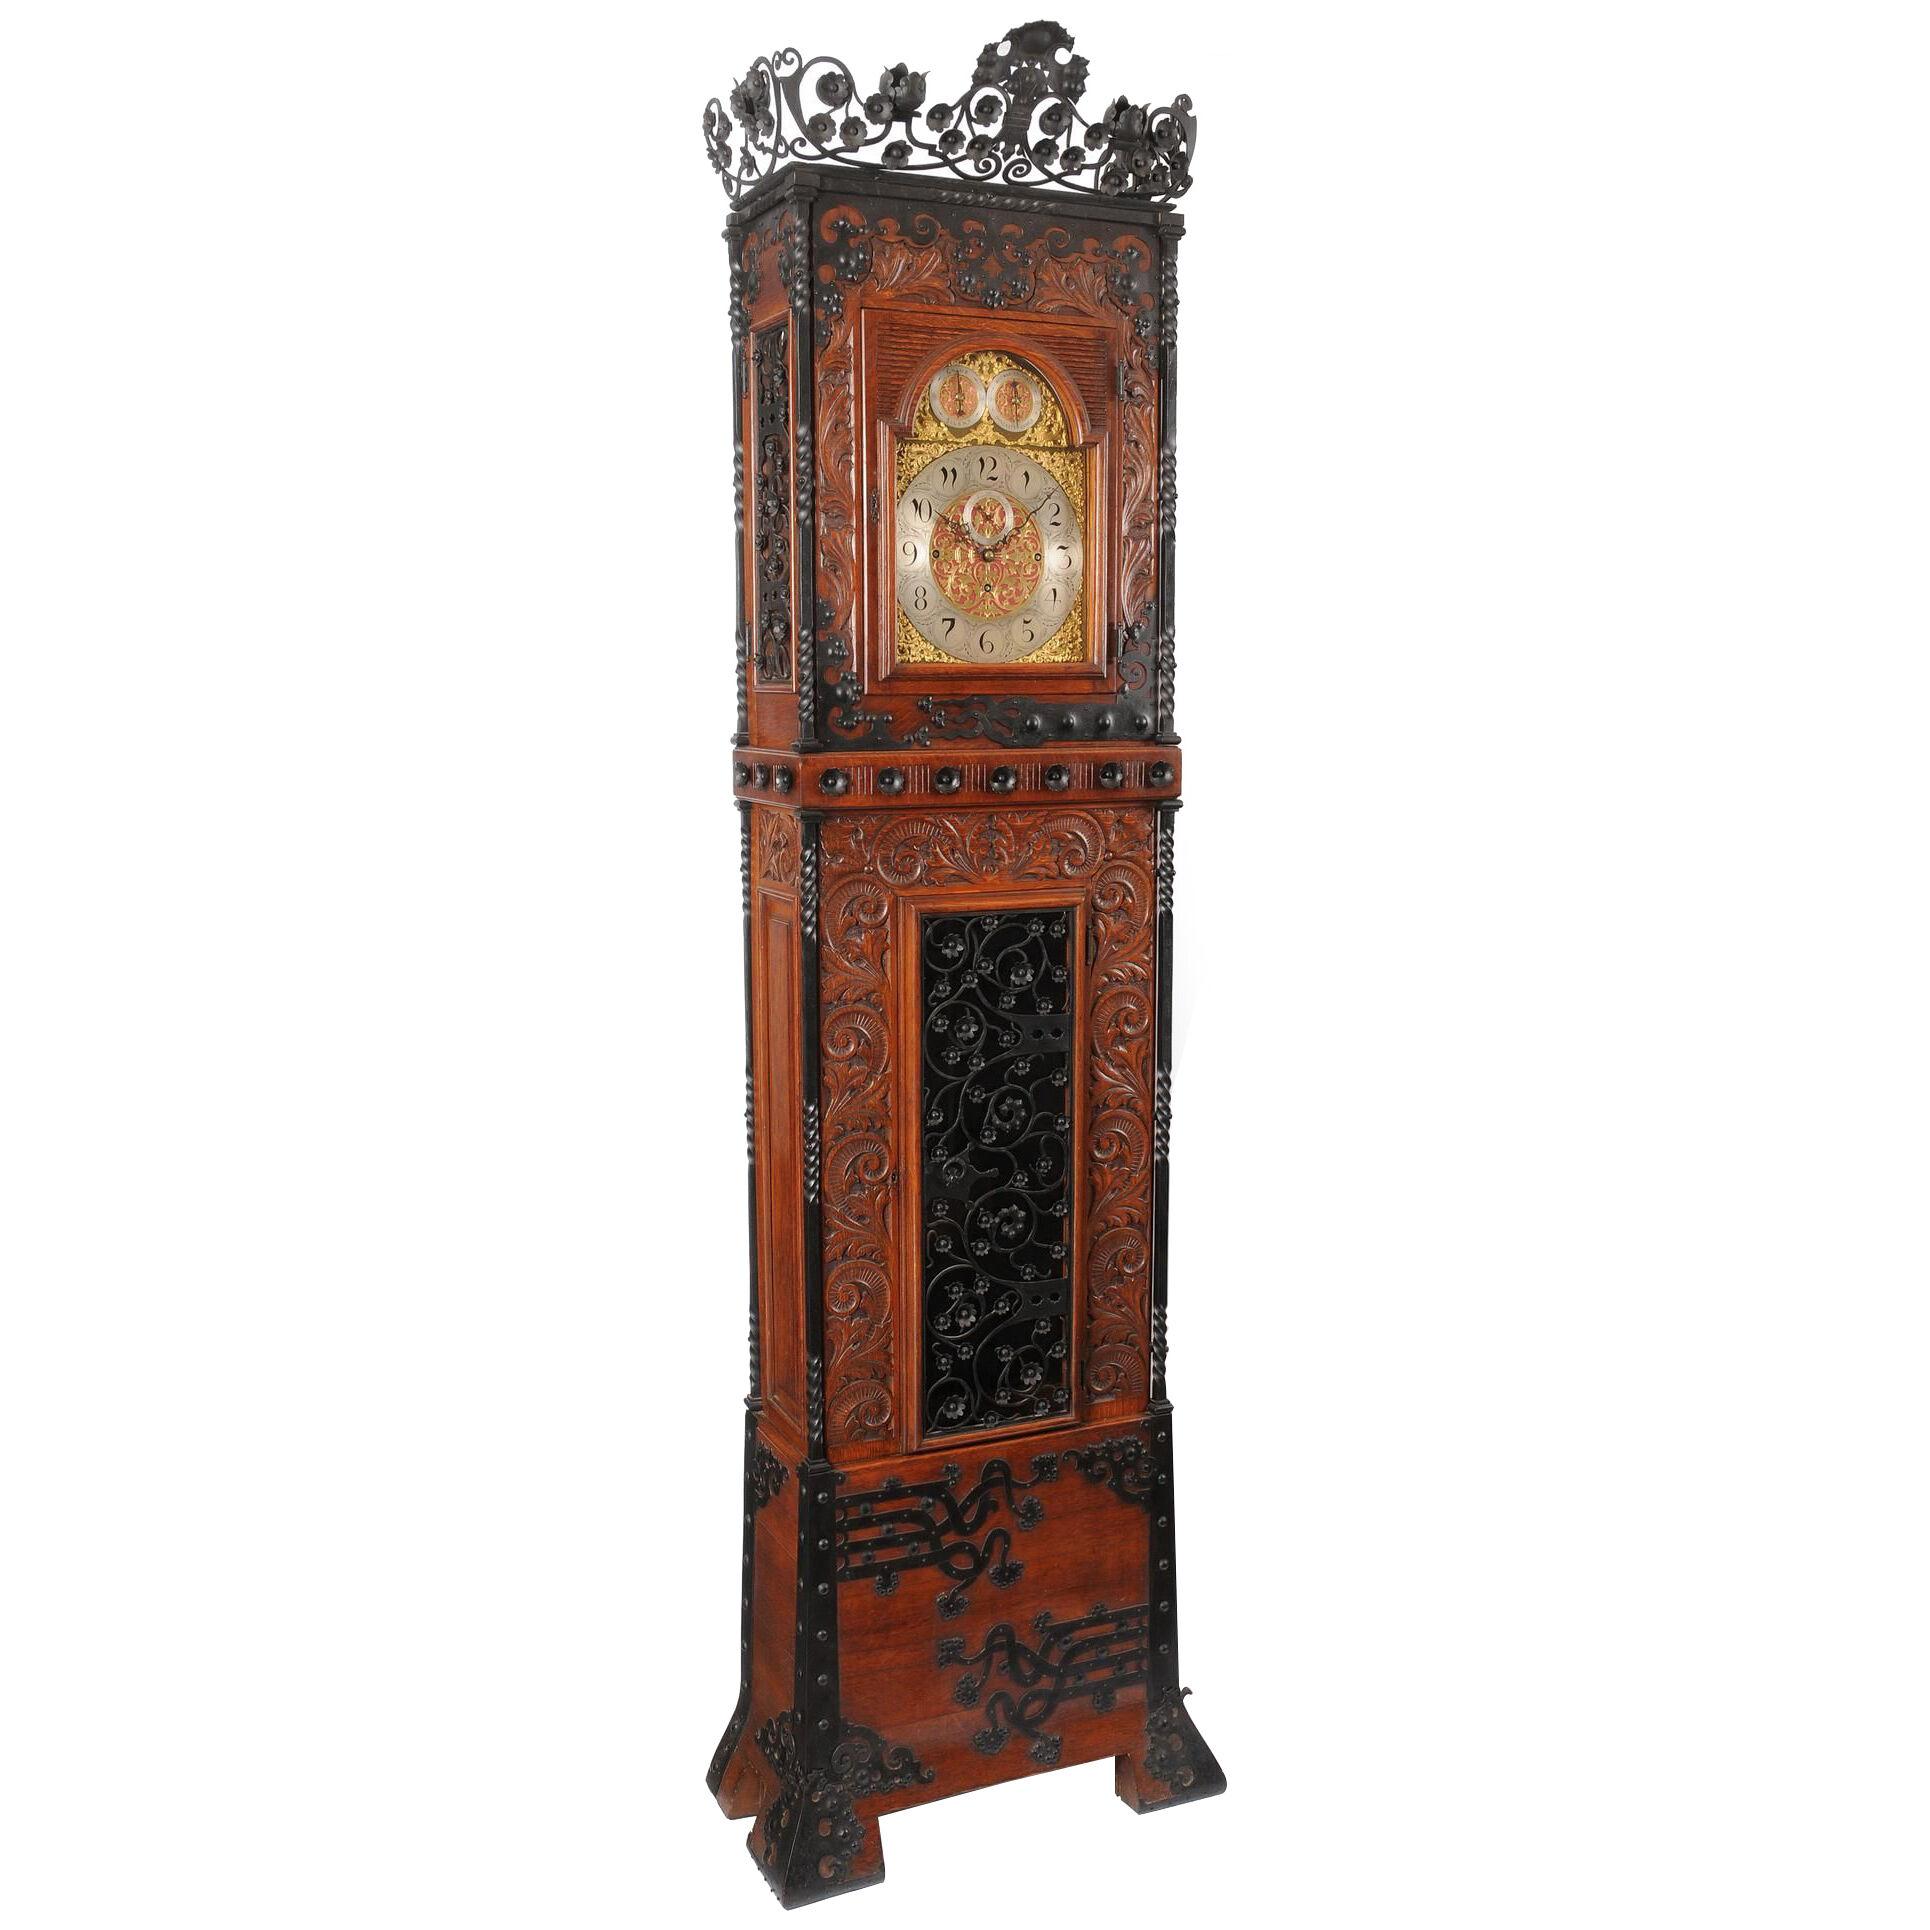 Tall Aesthetic Movement Oak and Wrought Iron Case Clock